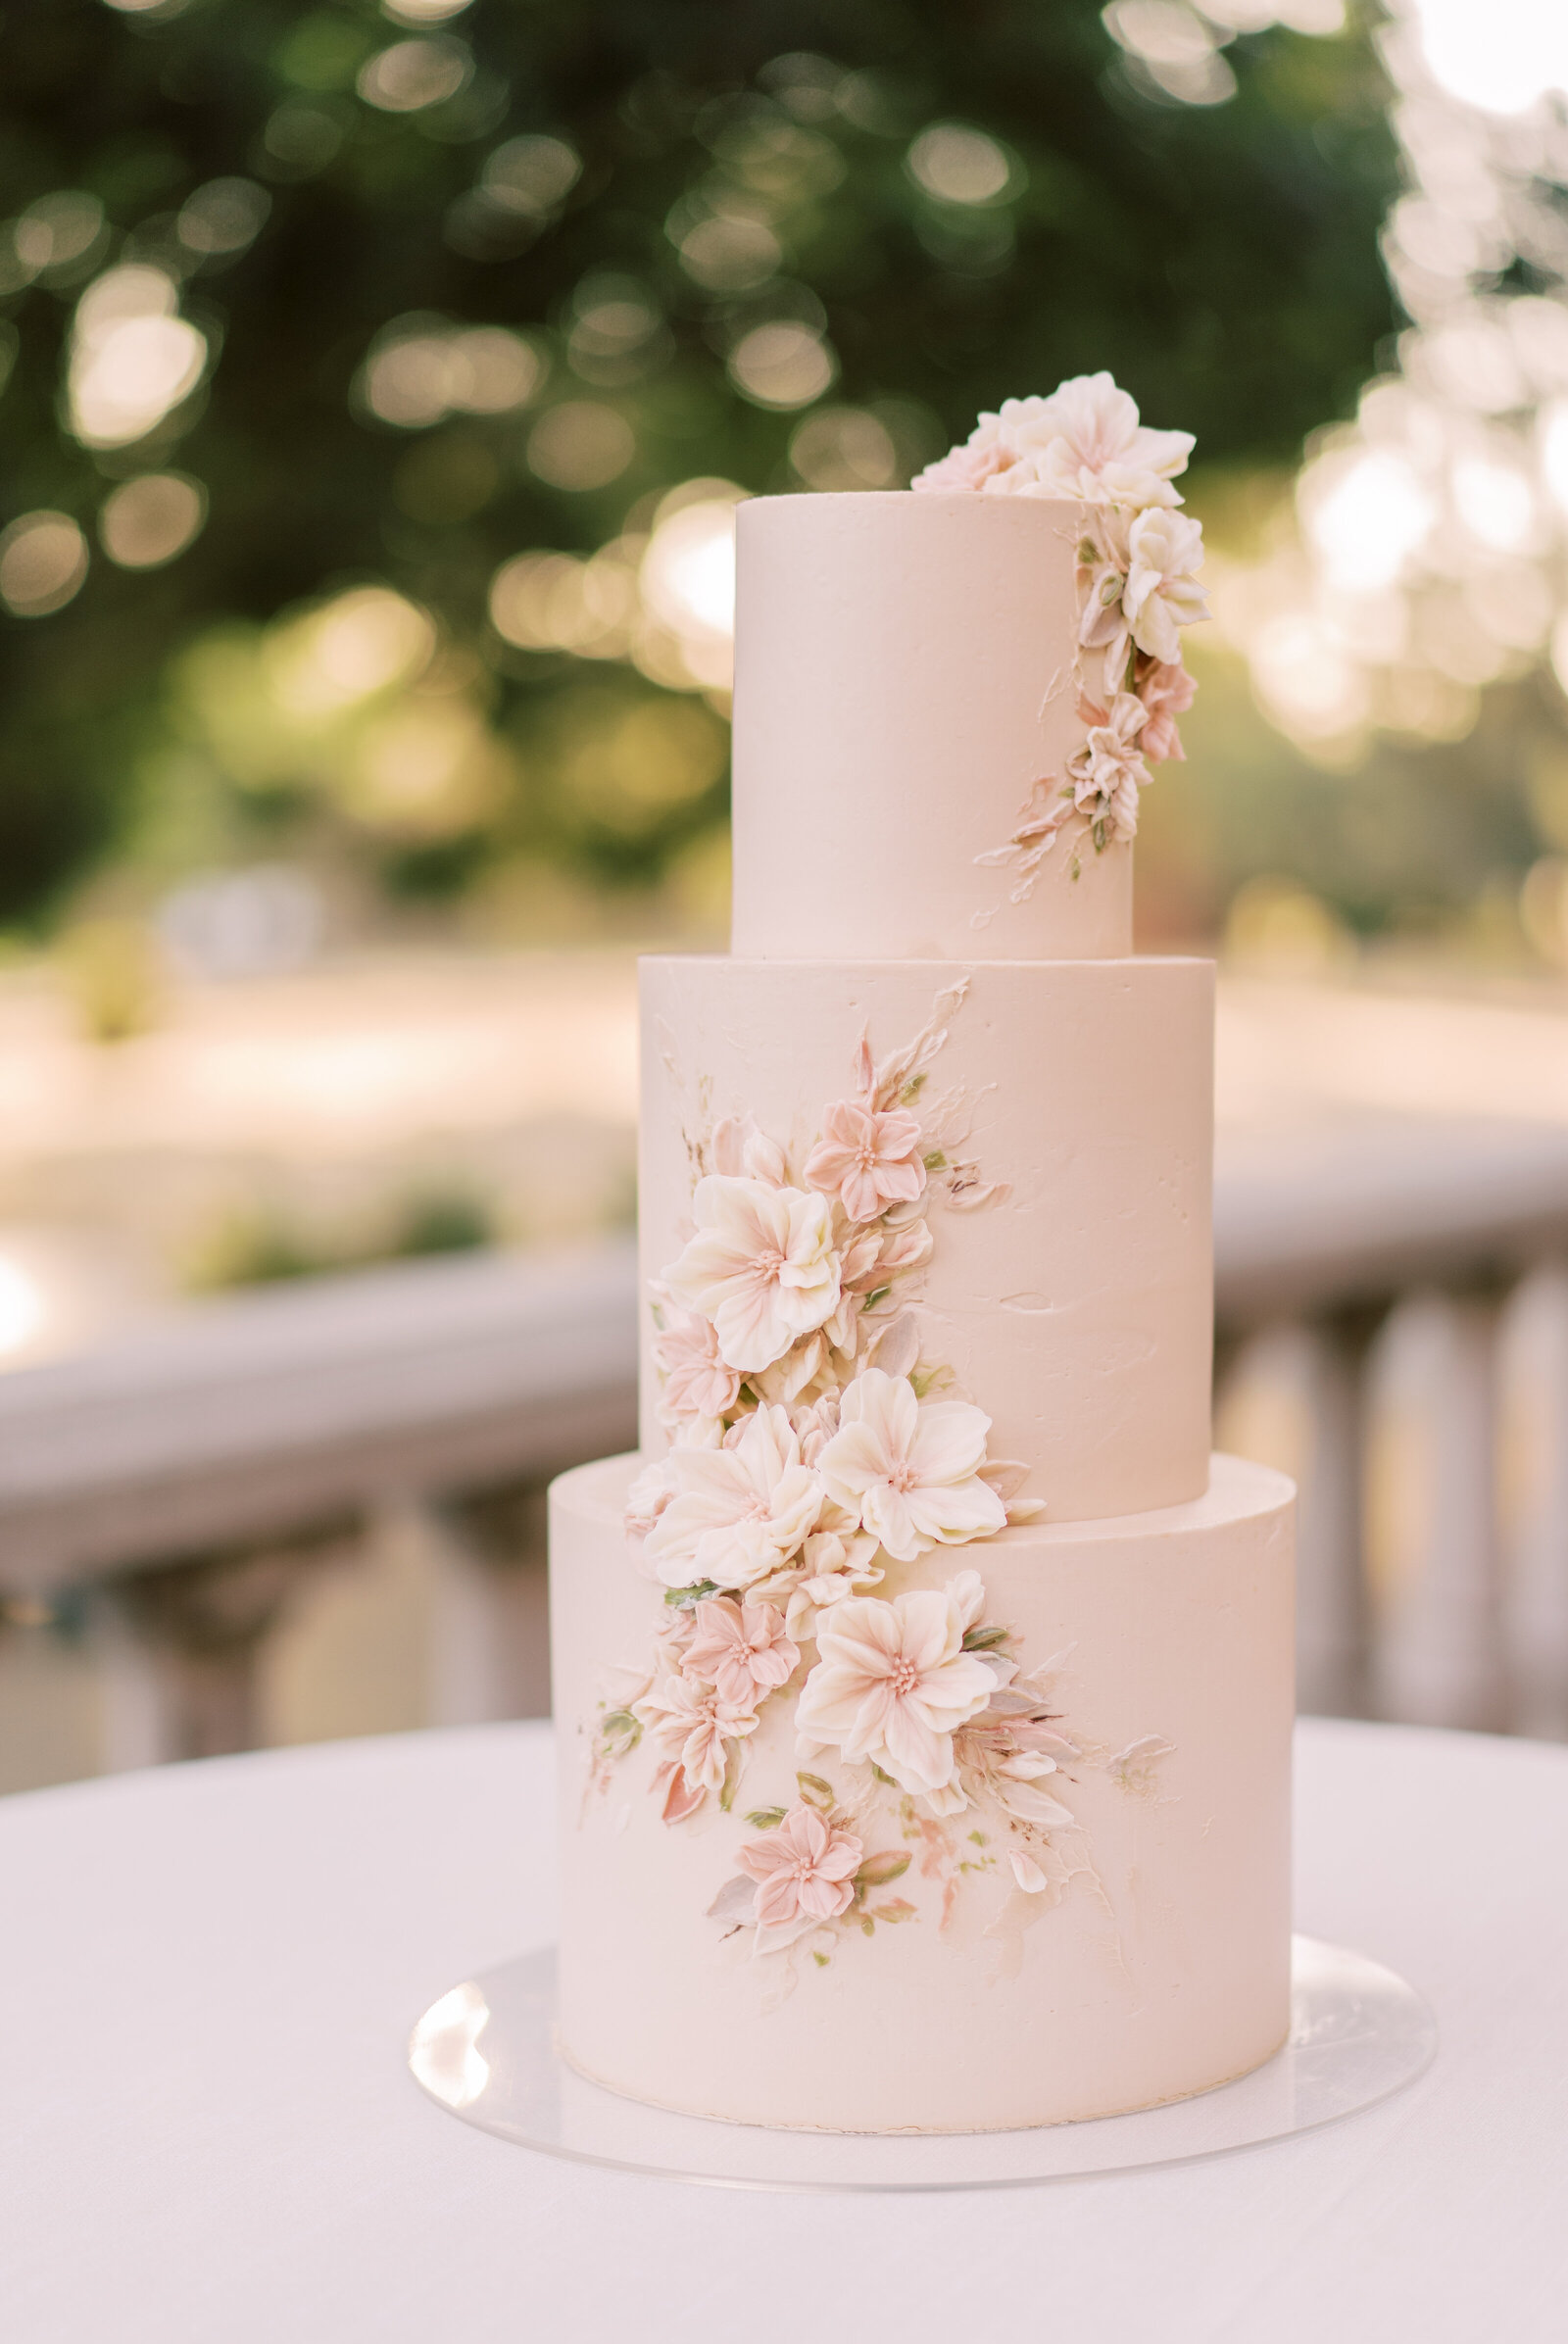 Portrait of a blush three-tiered wedding cake with flowers atop a round table outdoors.